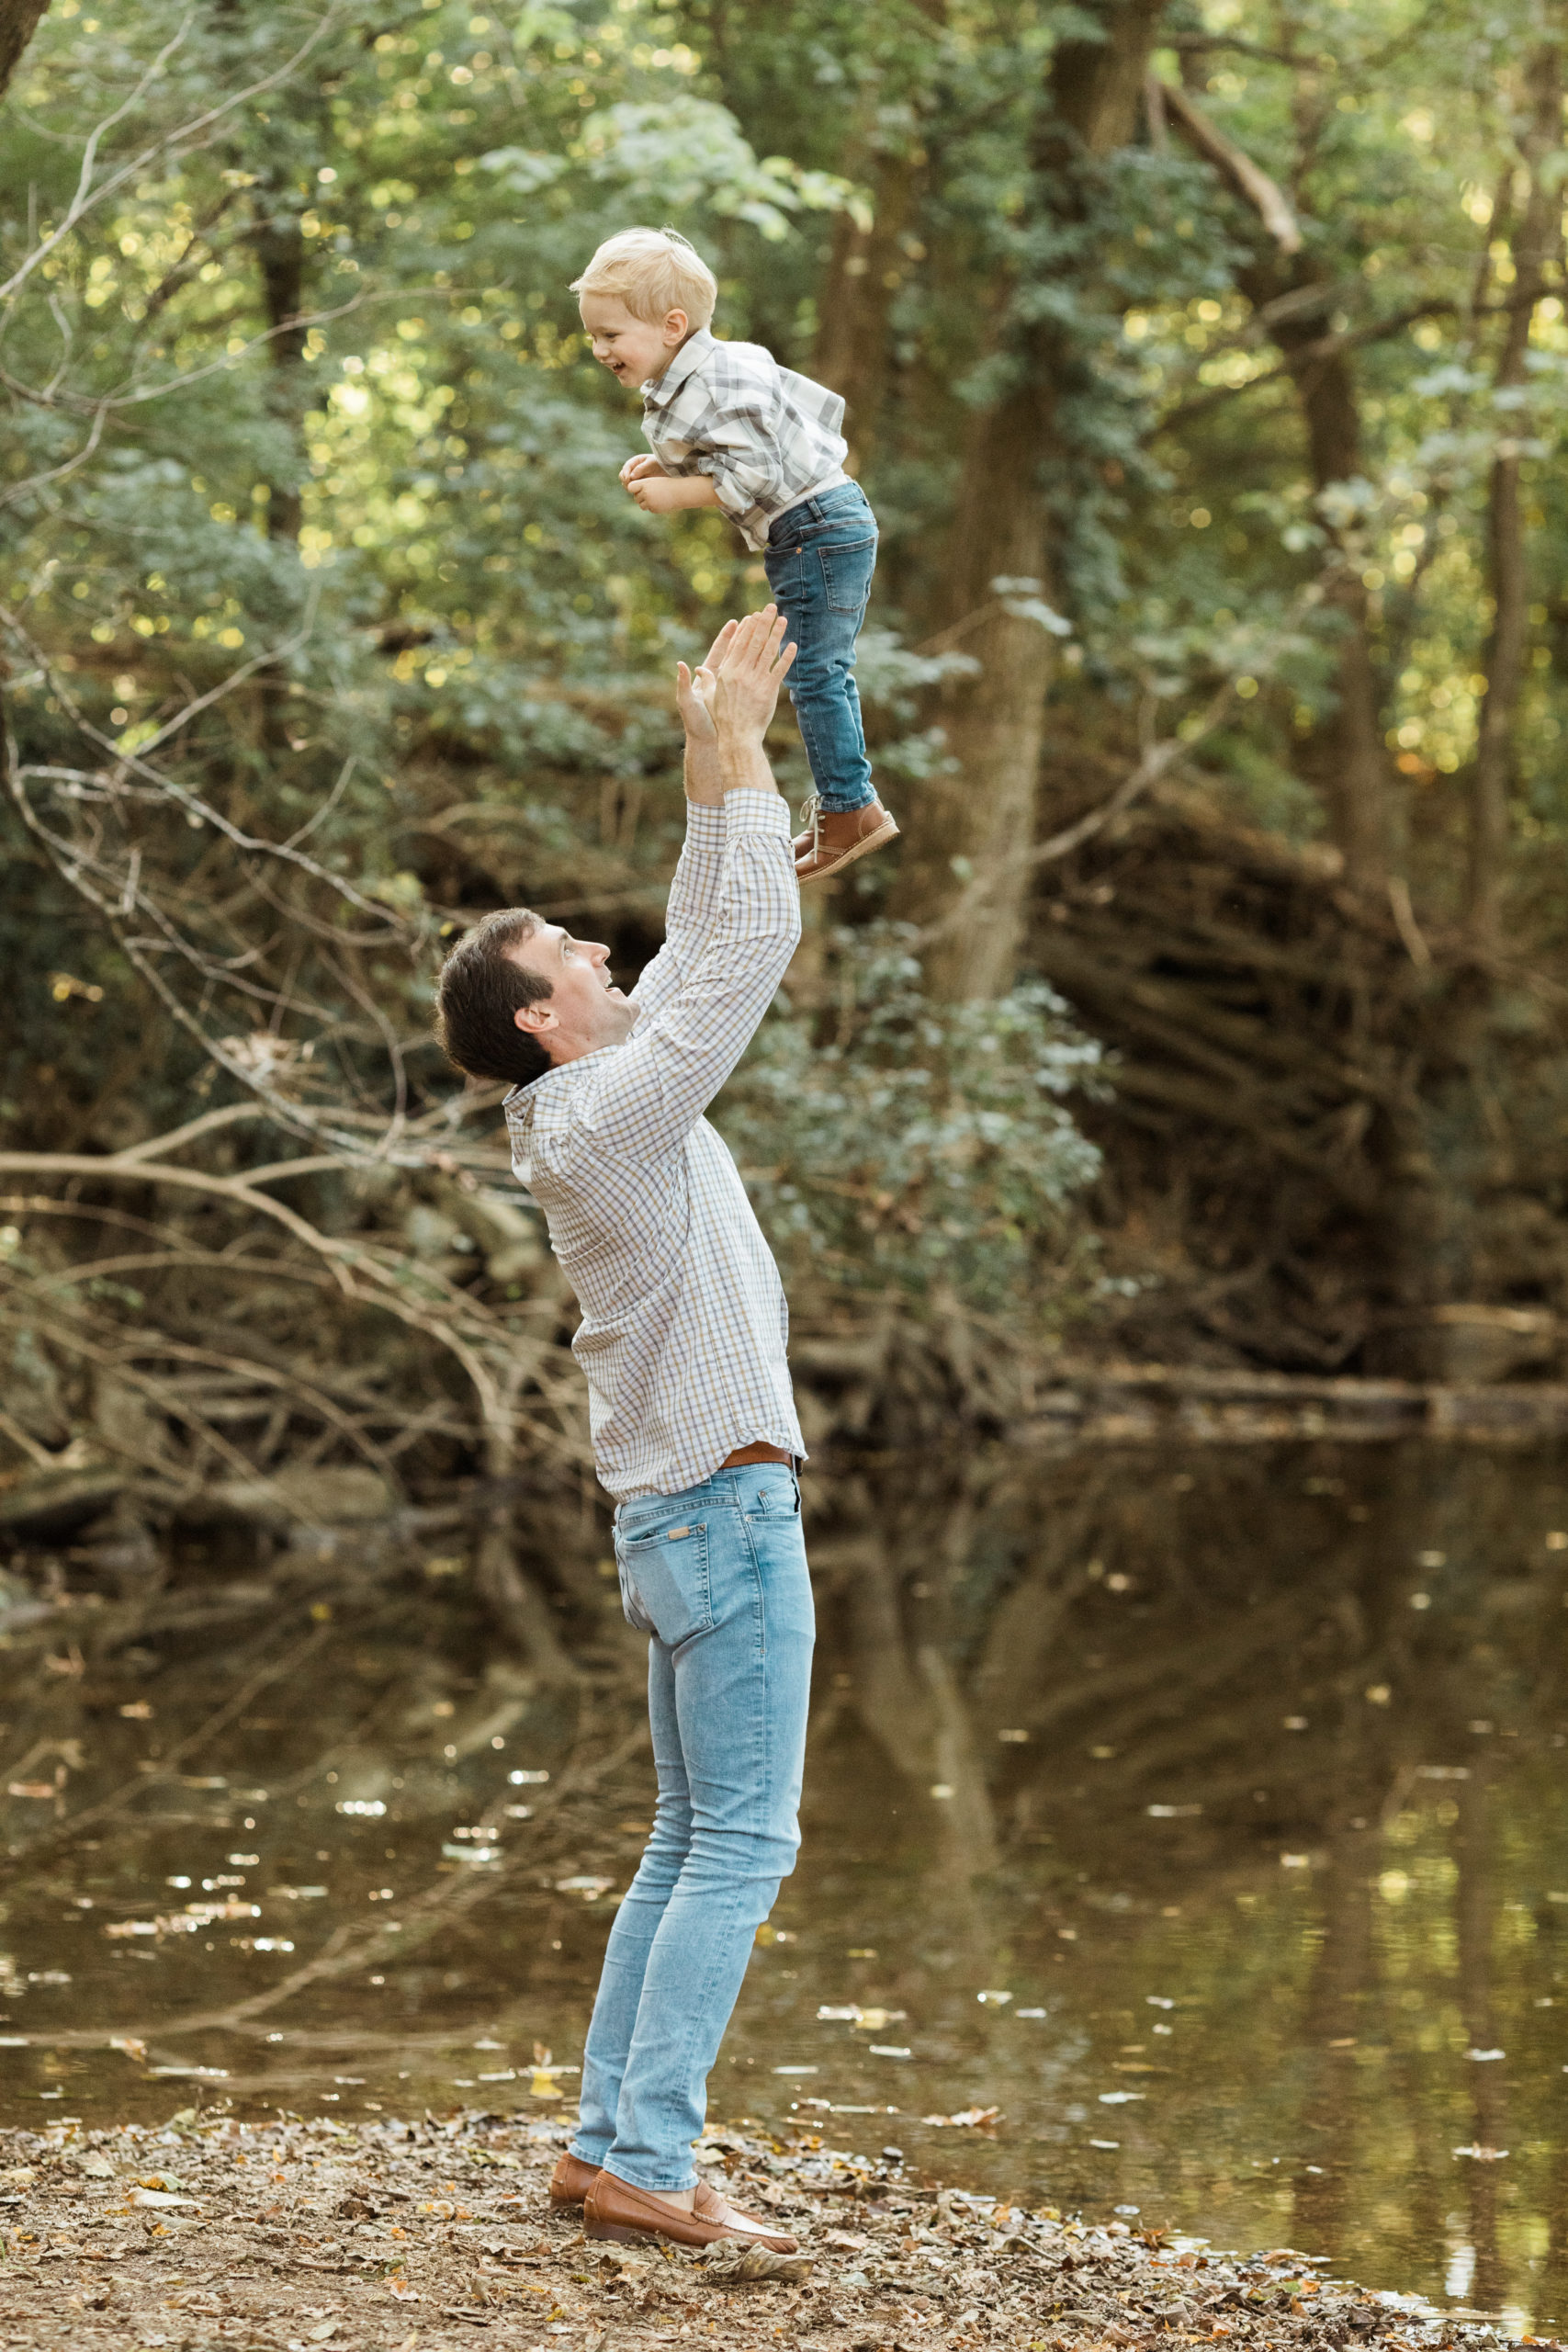 Outdoor photo of dad holding his son up in the air. Near a pond of water.